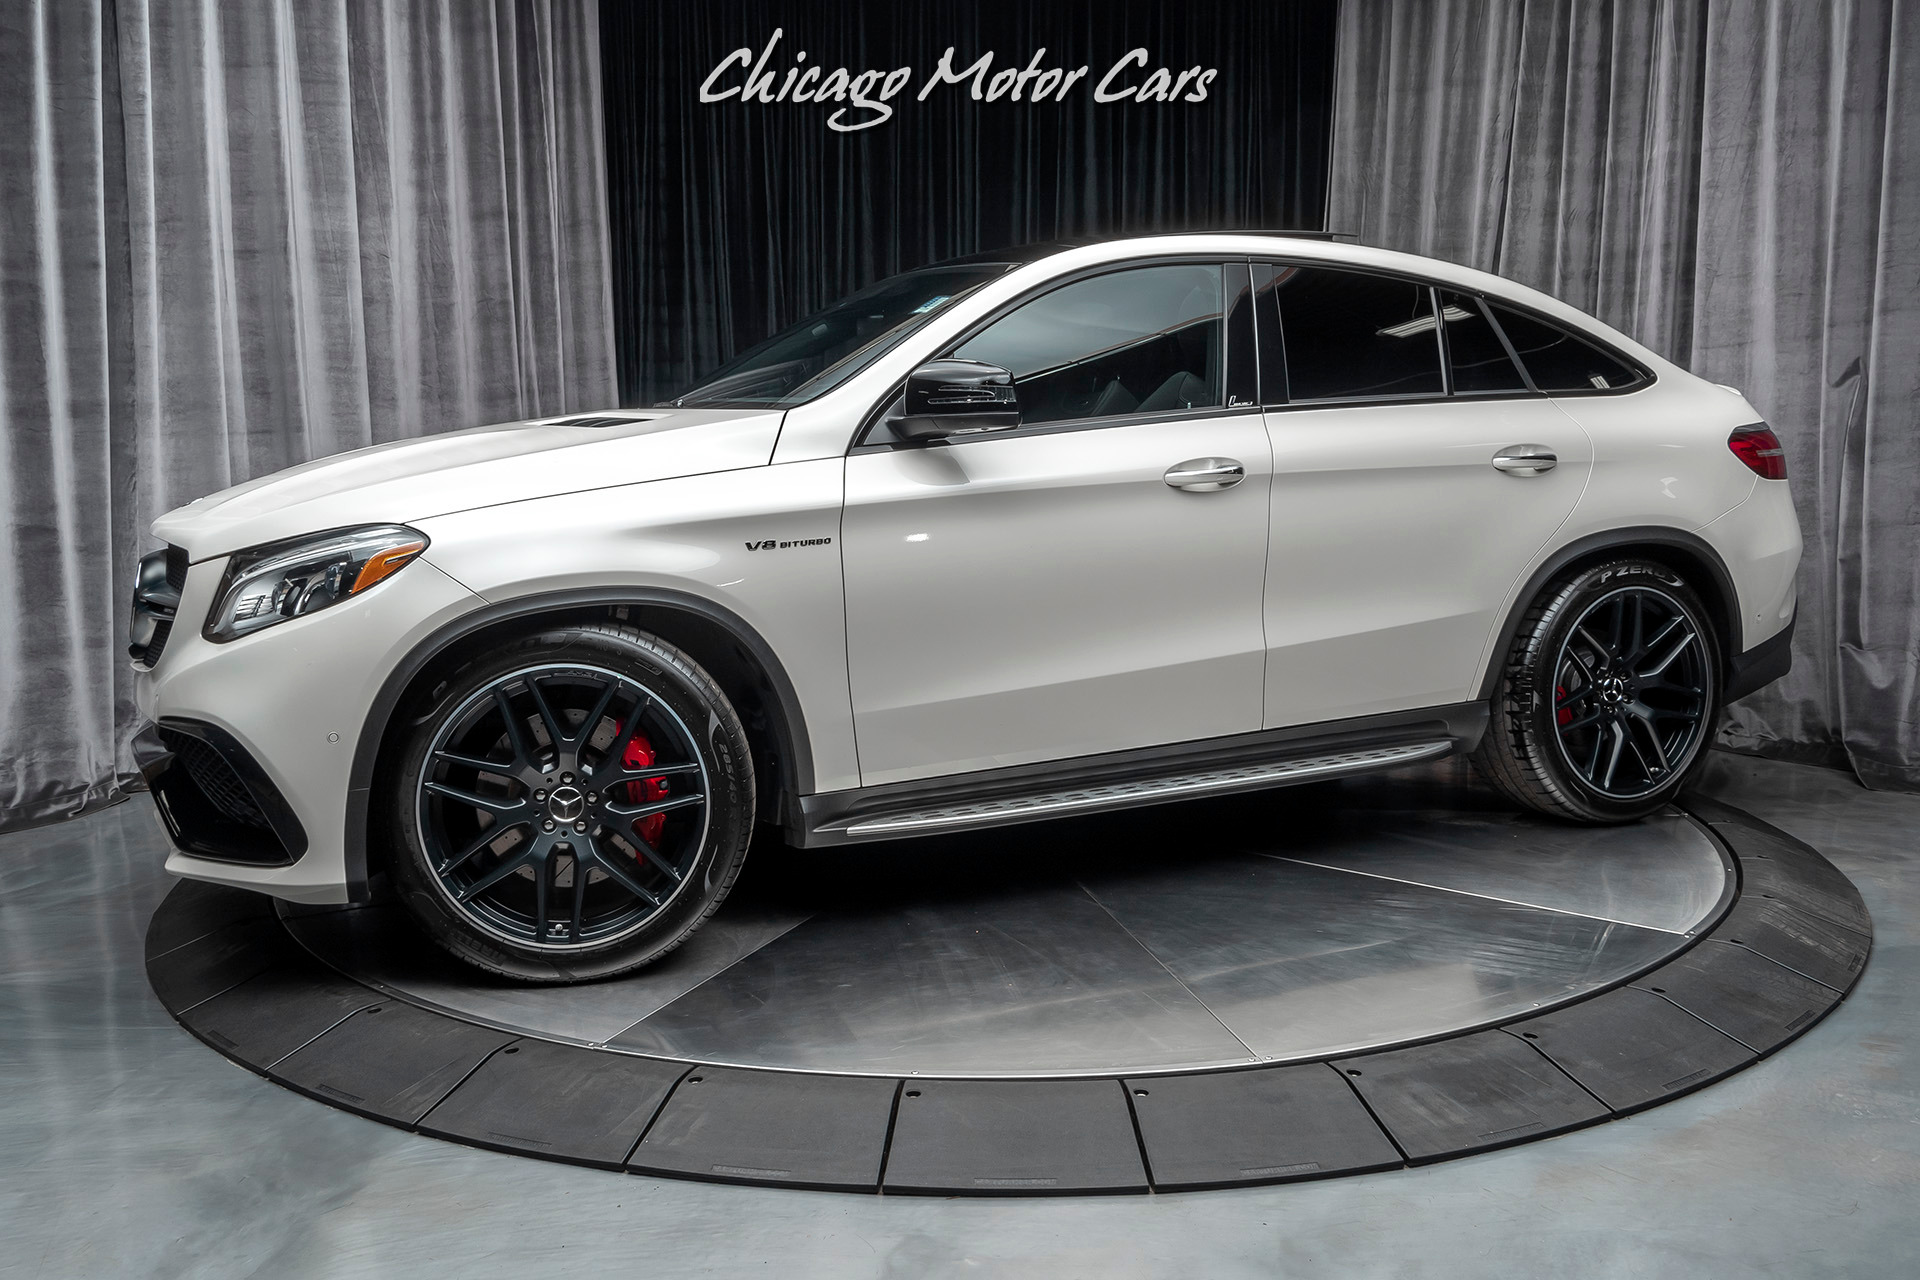 Used 2018 Mercedes-Benz GLE63 AMG S 4MATIC SUV MSRP $123,040+ LOADED!  MASSAGE SEATS! For Sale (Special Pricing) | Chicago Motor Cars Stock #16827